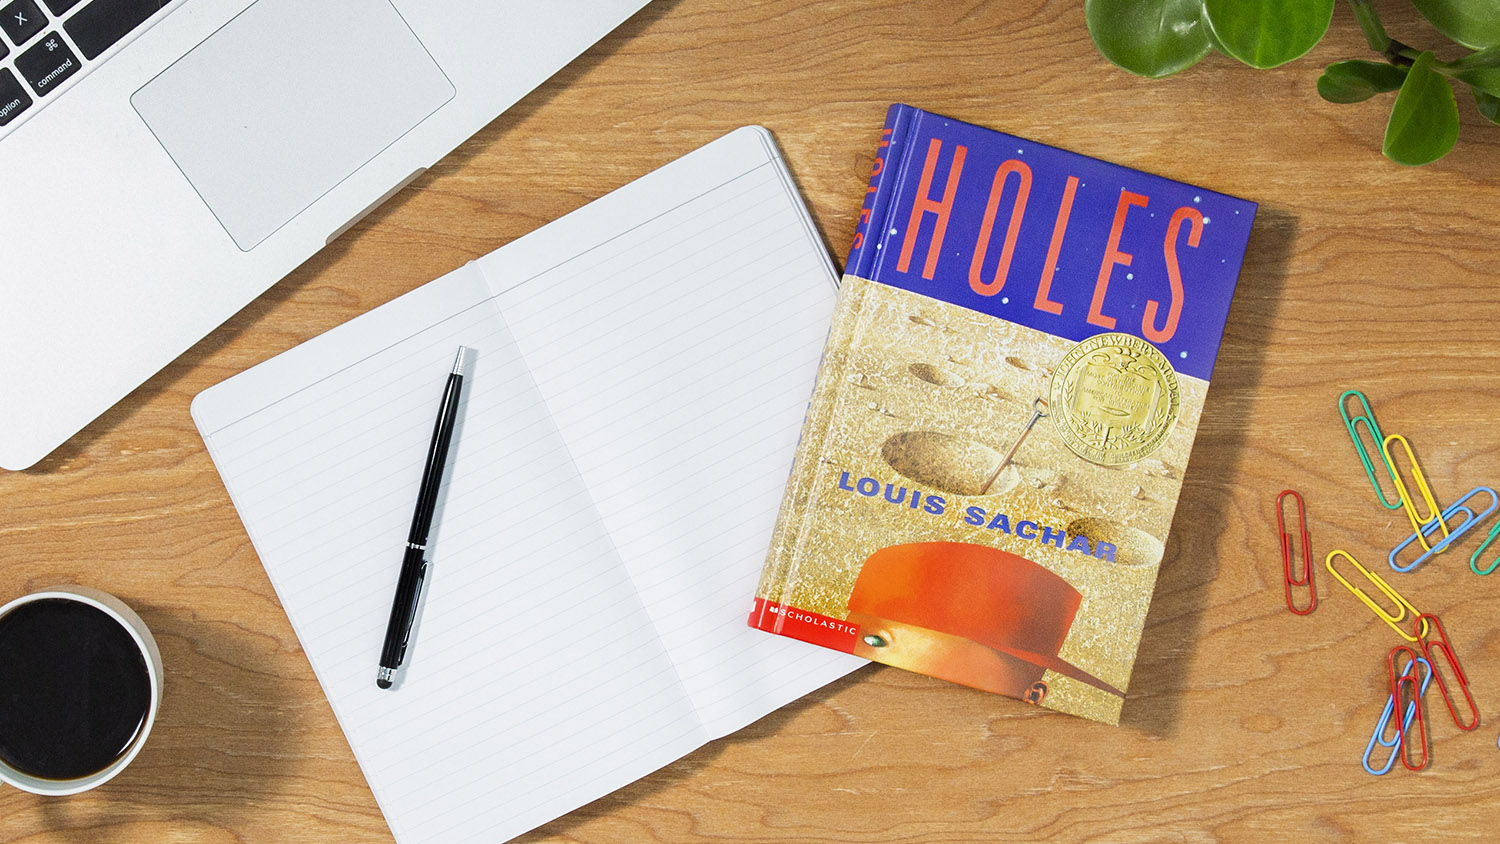 holes by louis sachar in spanish